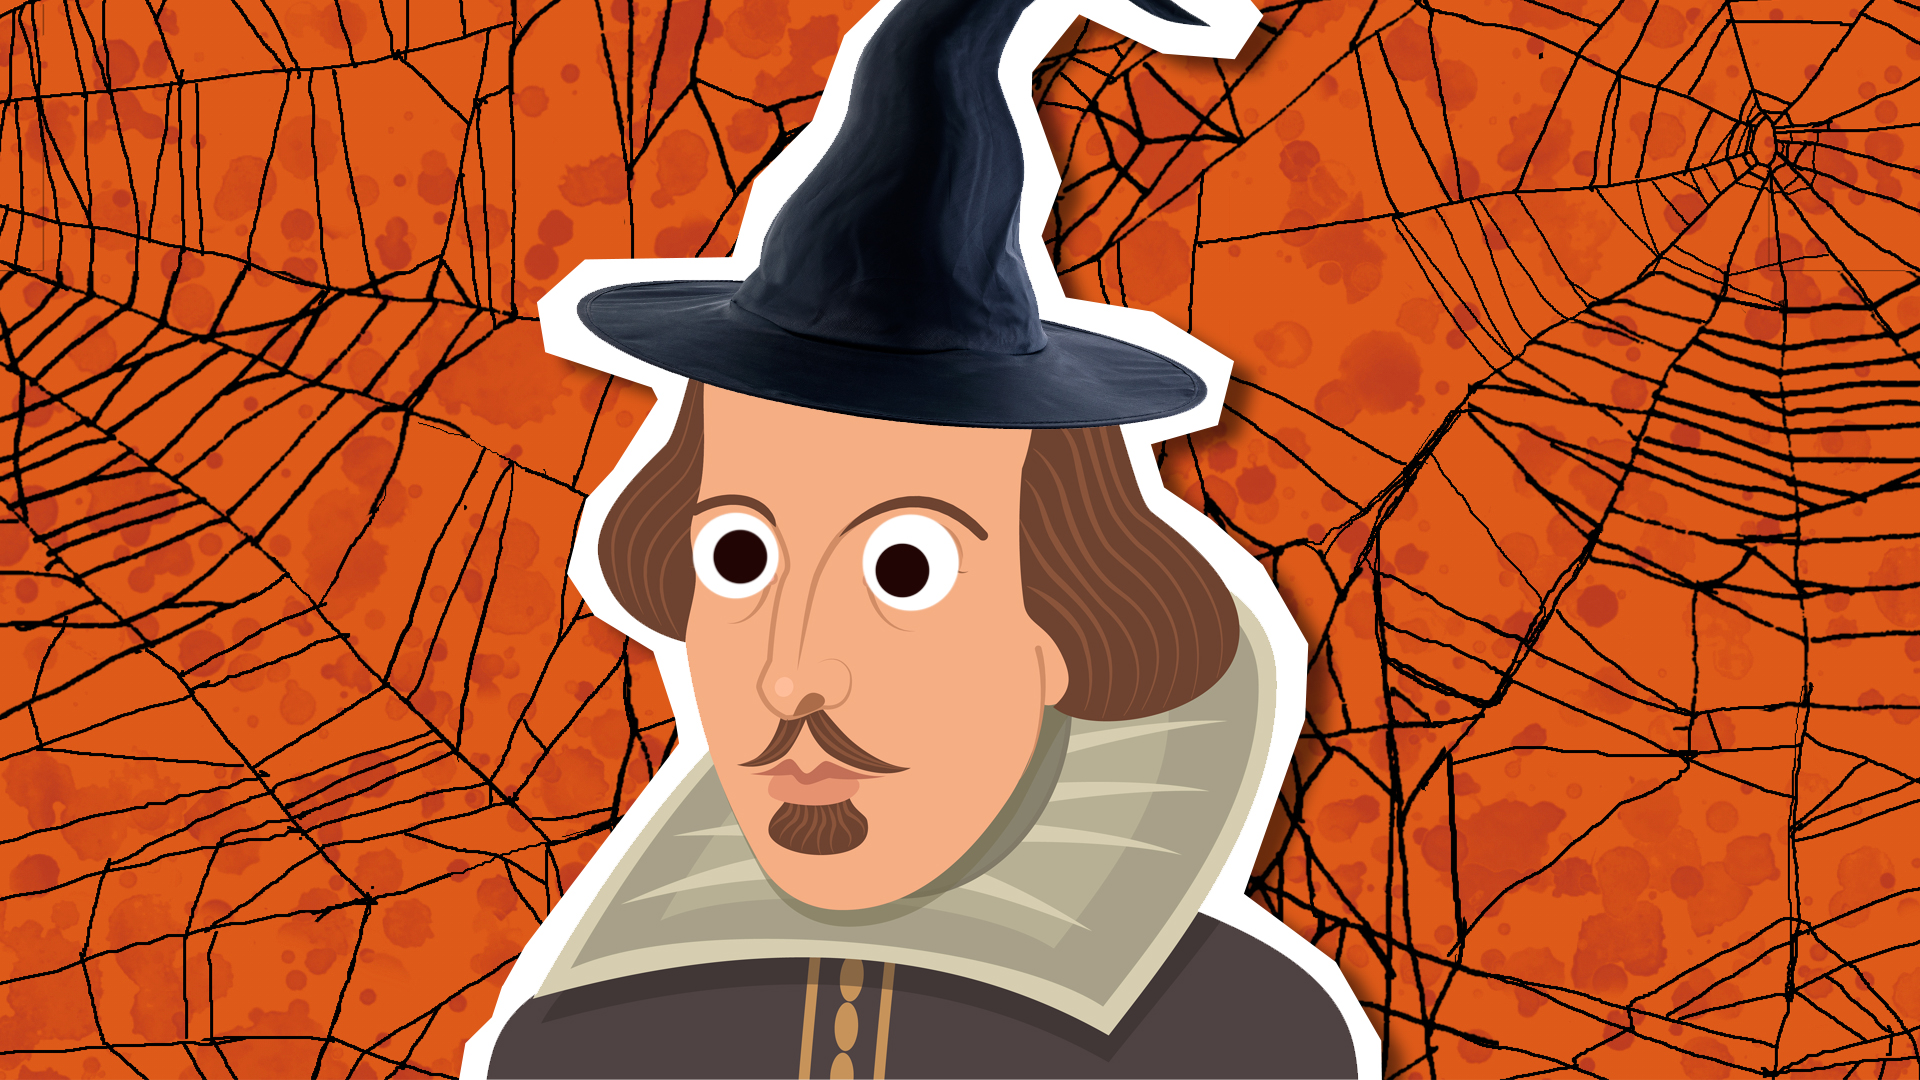 William Shakespeare in a witches hat